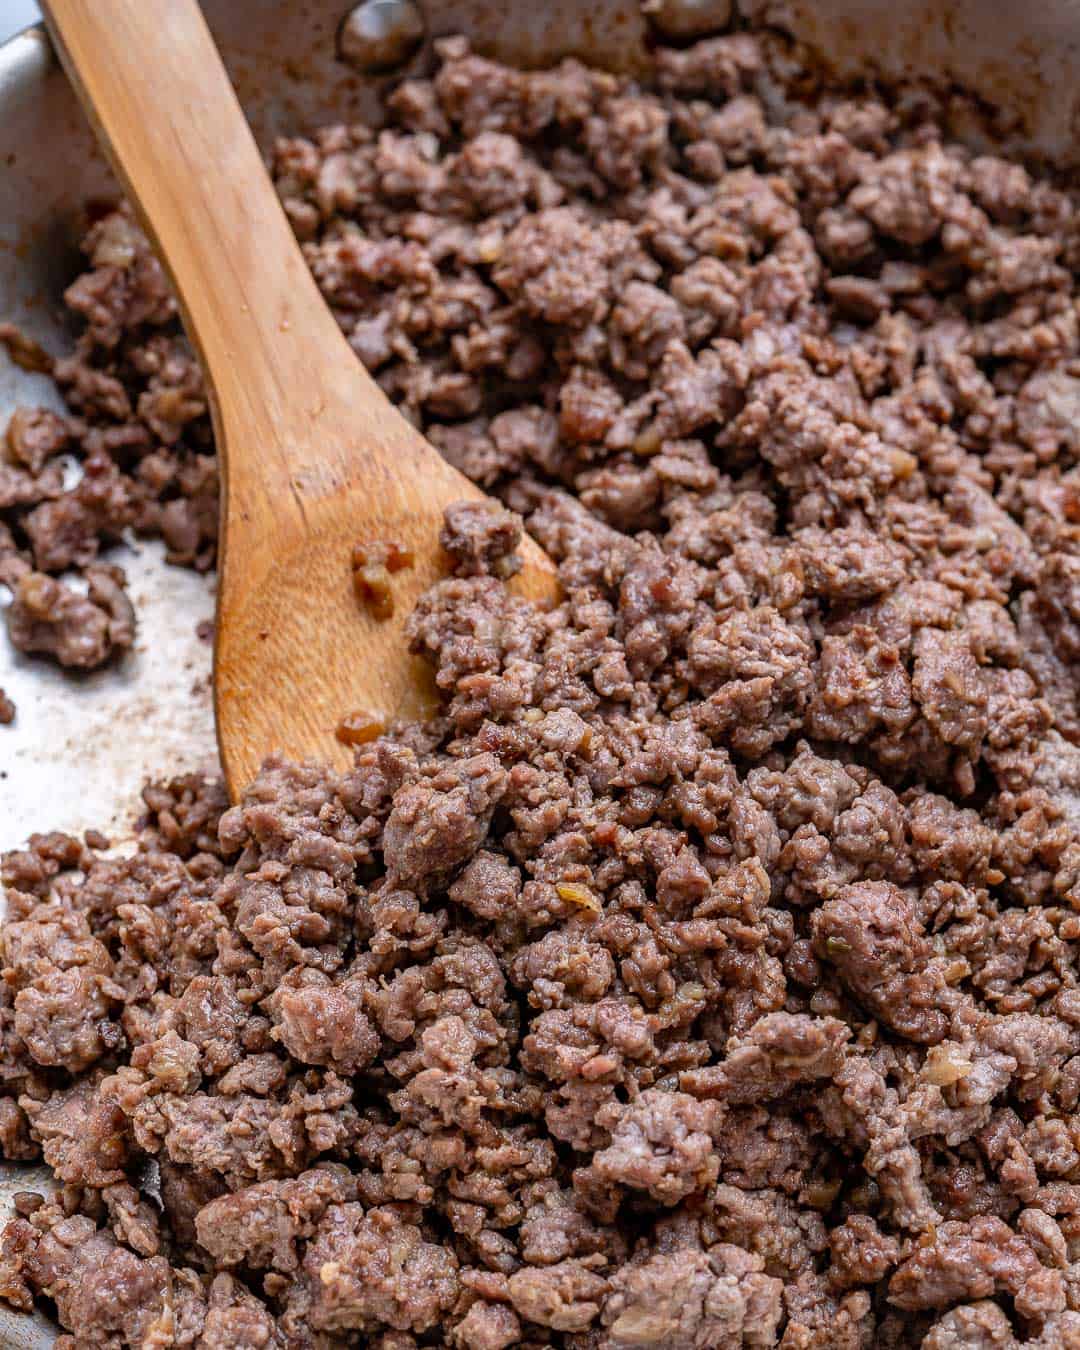 Cook the ground beef until it is no longer pink. 